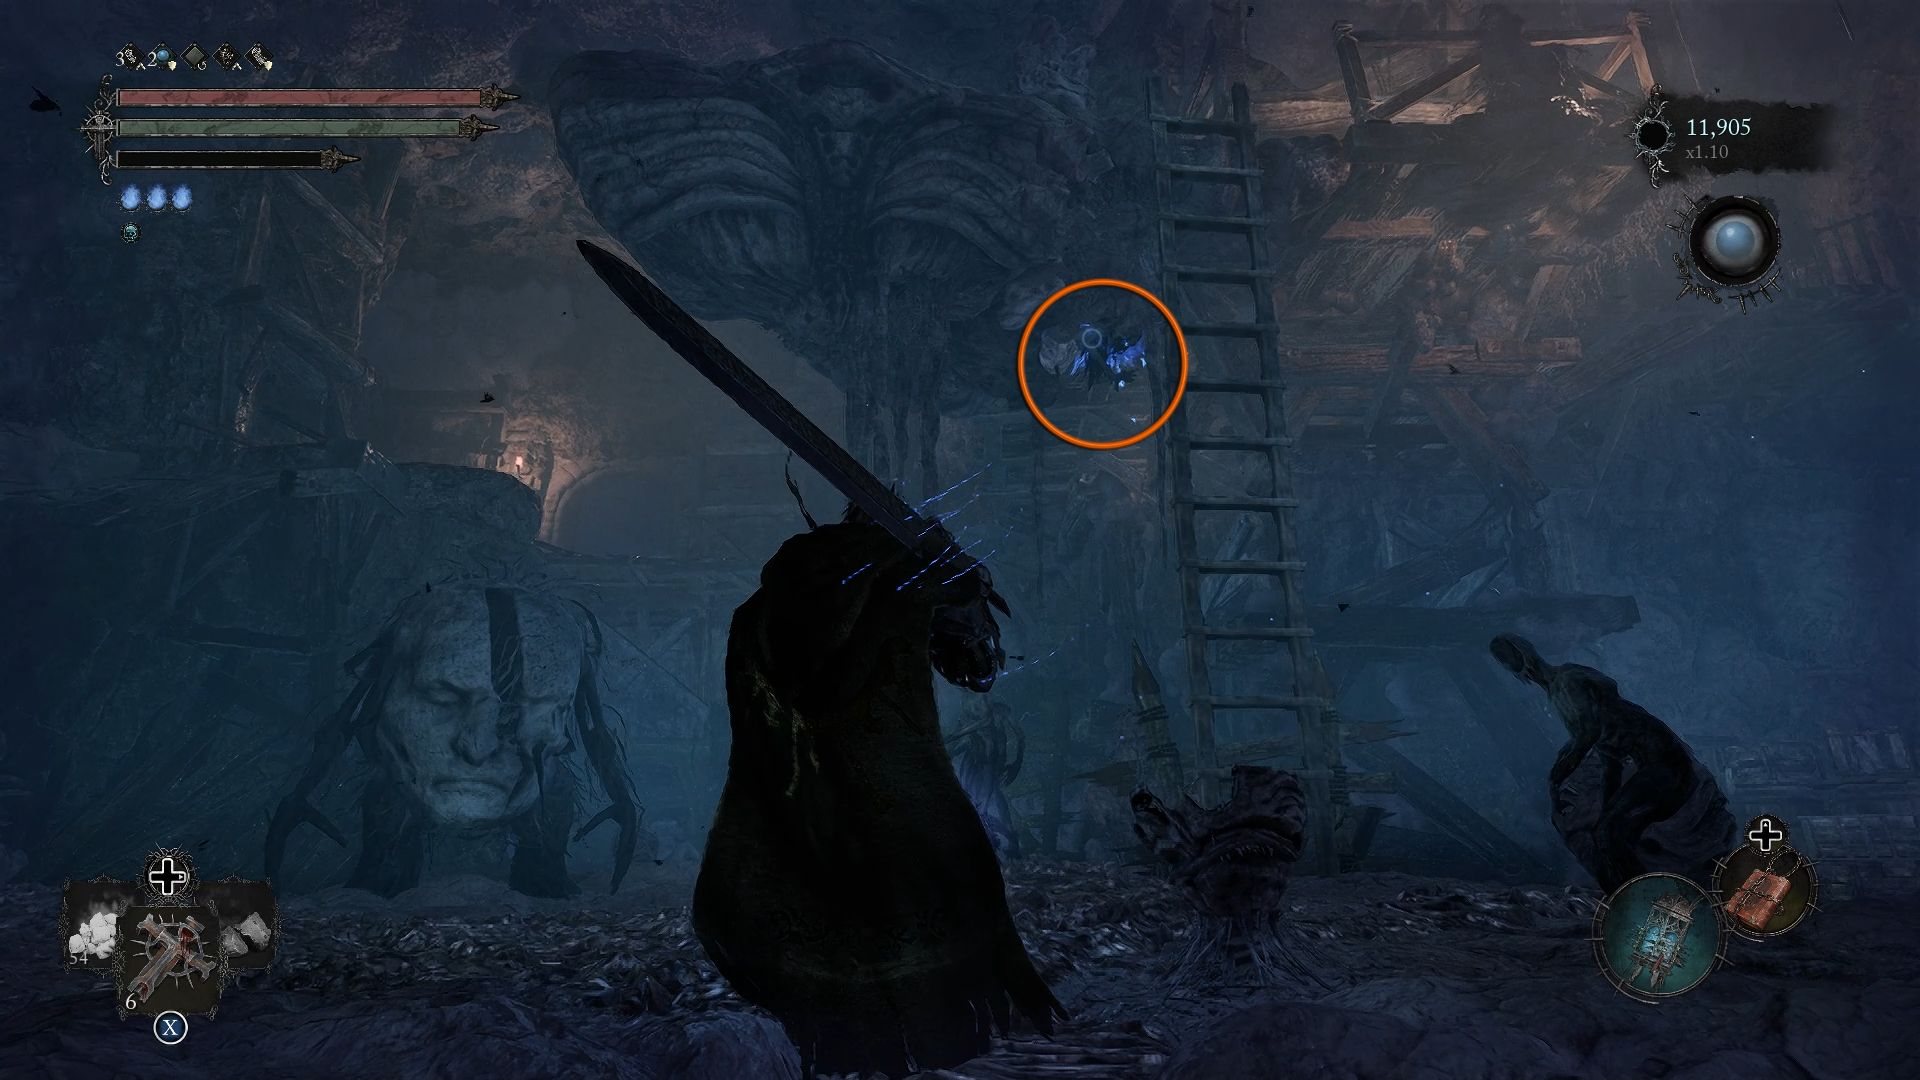 A circle showing the Soulflay item next to the ladder Lords of the Fallen